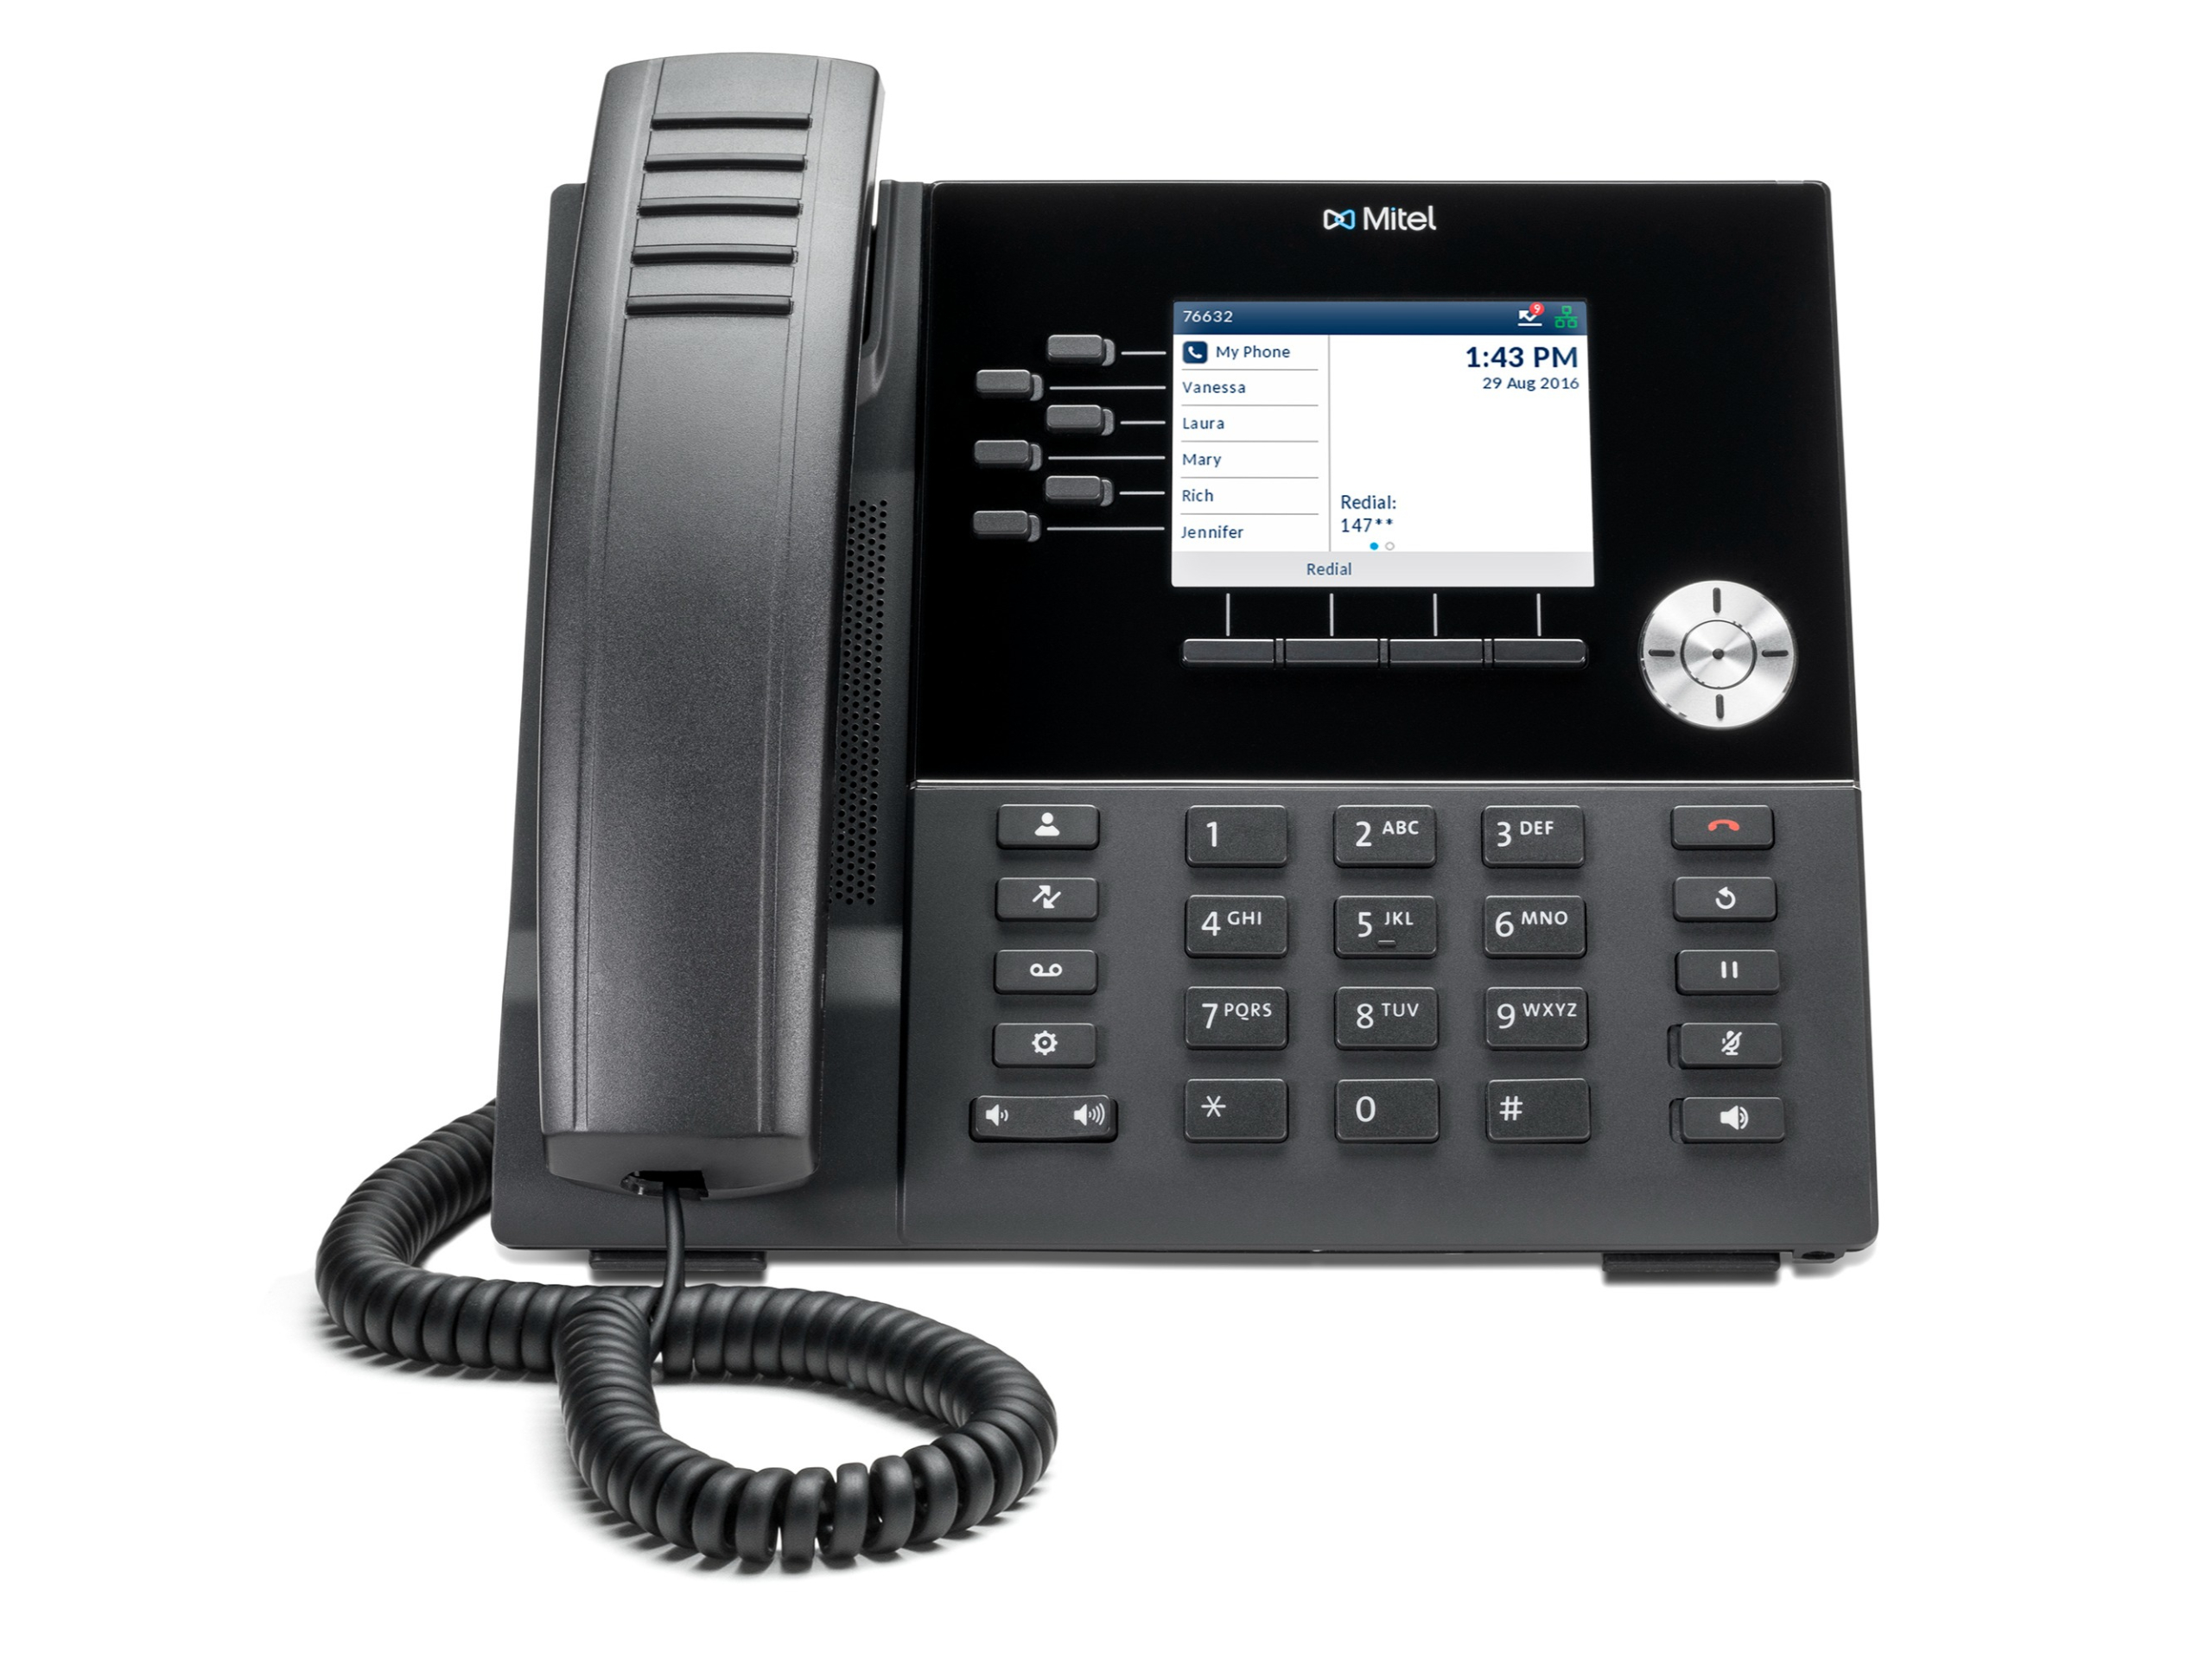 The 6920w is built from the ground up to provide an exceptional HD audio experience with high-quality full-duplex speakerphone and support for Mitel’s H-Series USB and EHS/DHSG headsets.